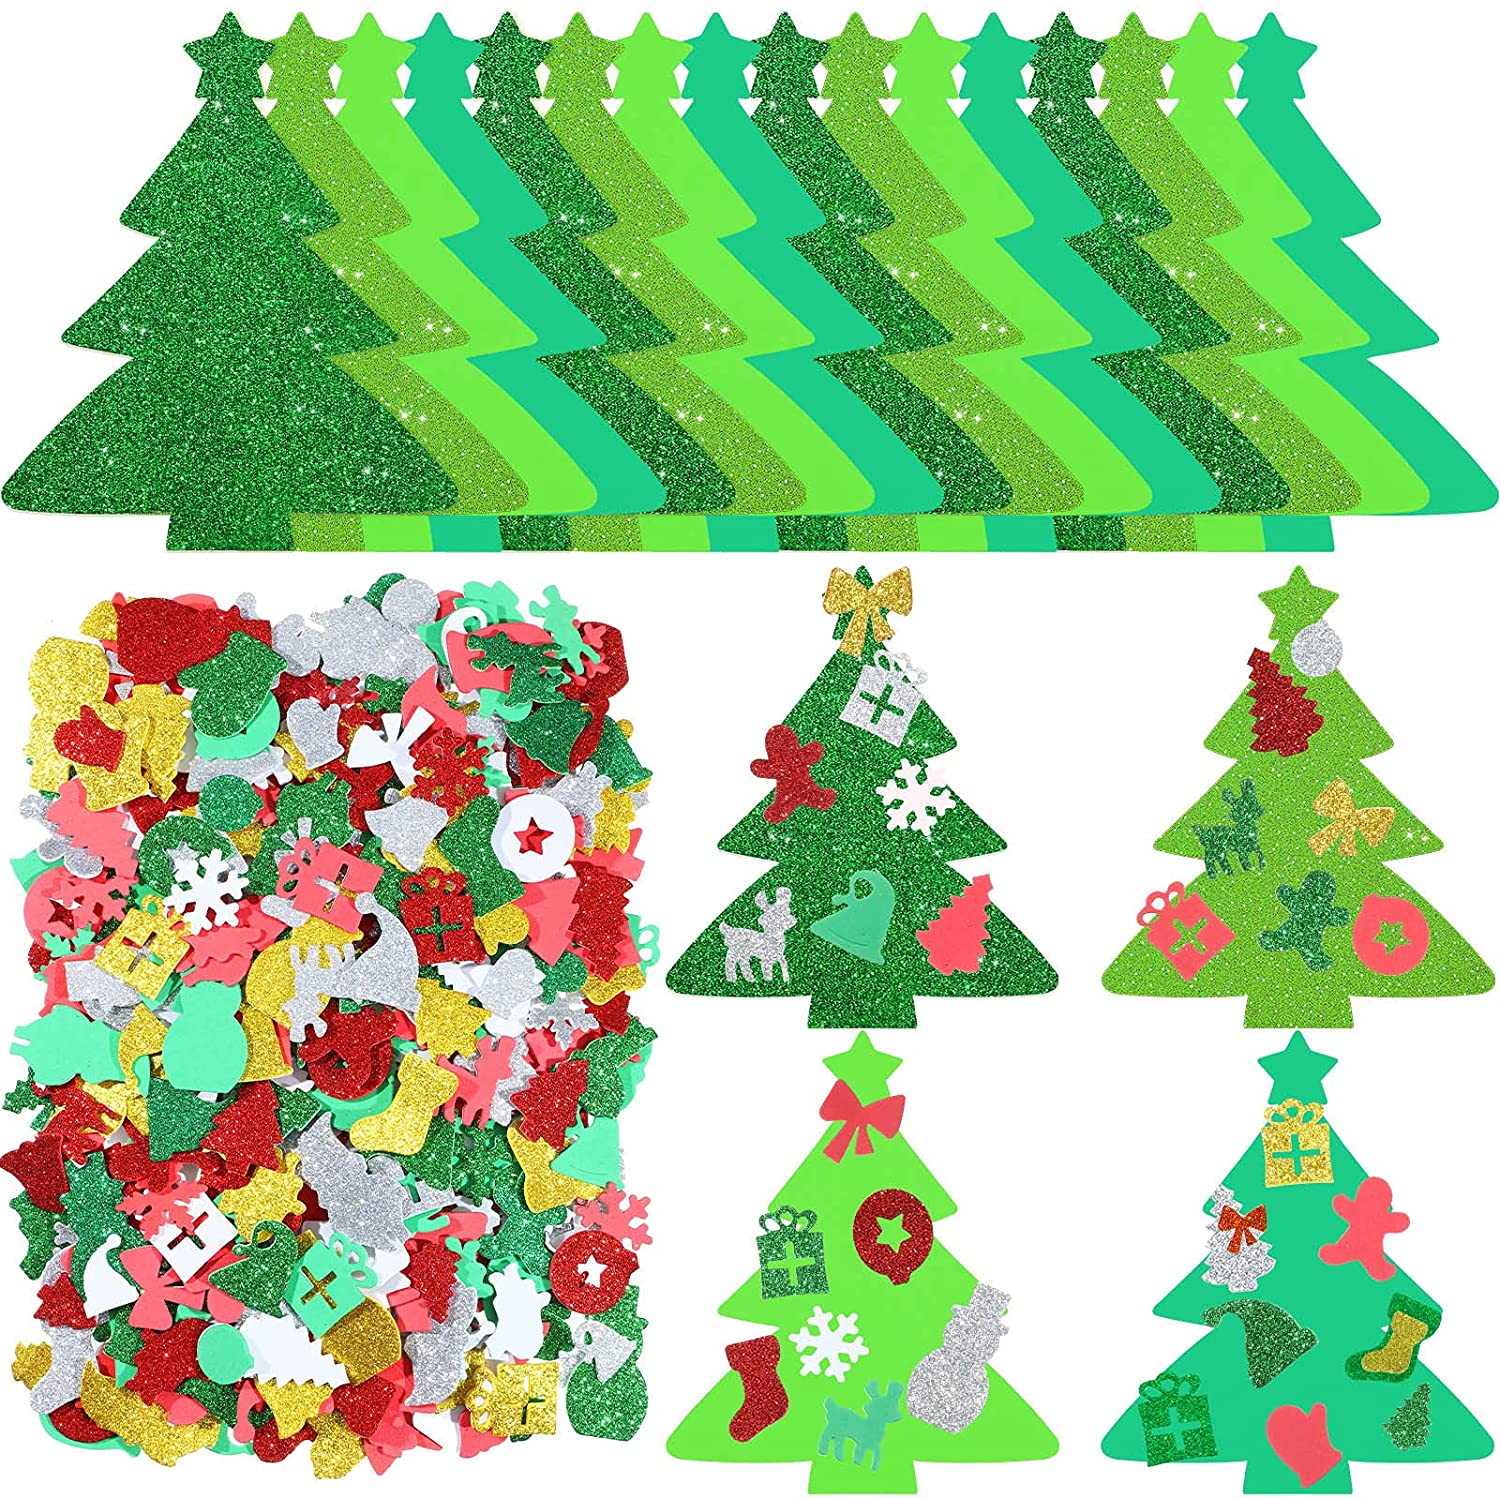 100x Assorted Wooden Cutout Shapes Craft Christmas Decor Party Embellishments 